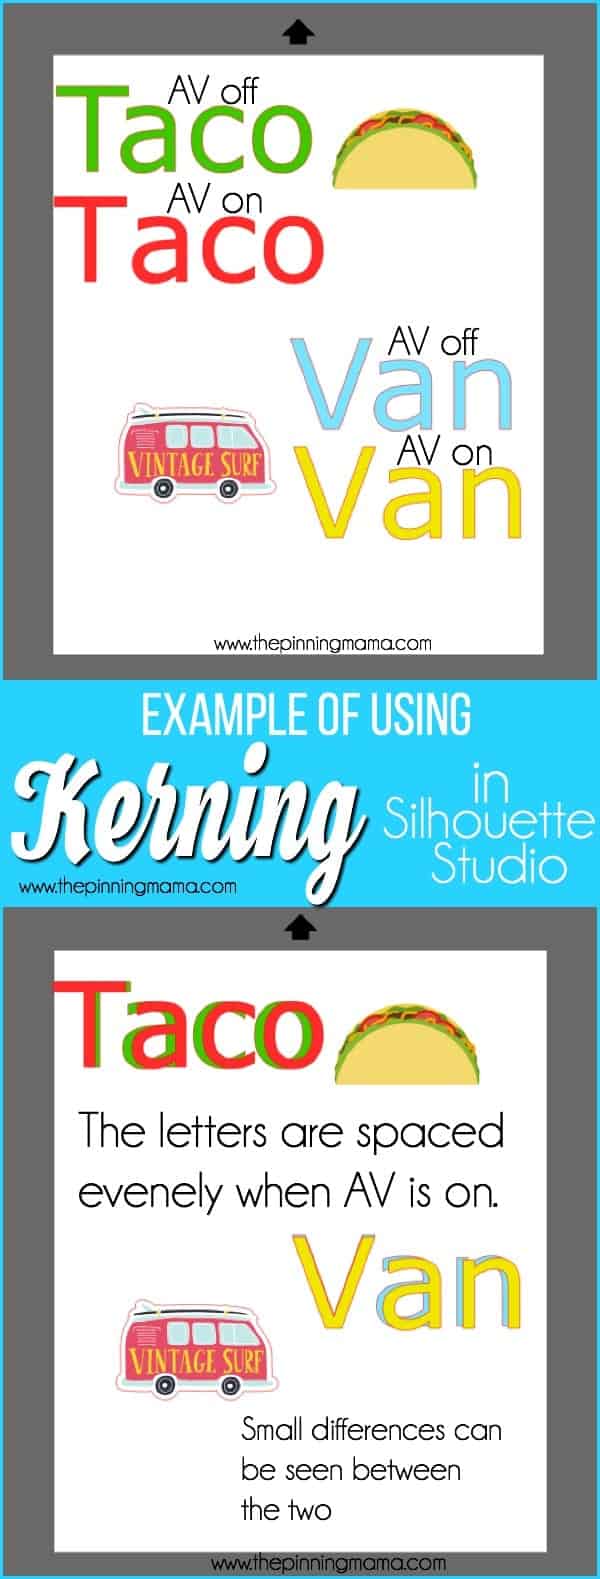 Examples of using Kerning in Silhouette Studio. 